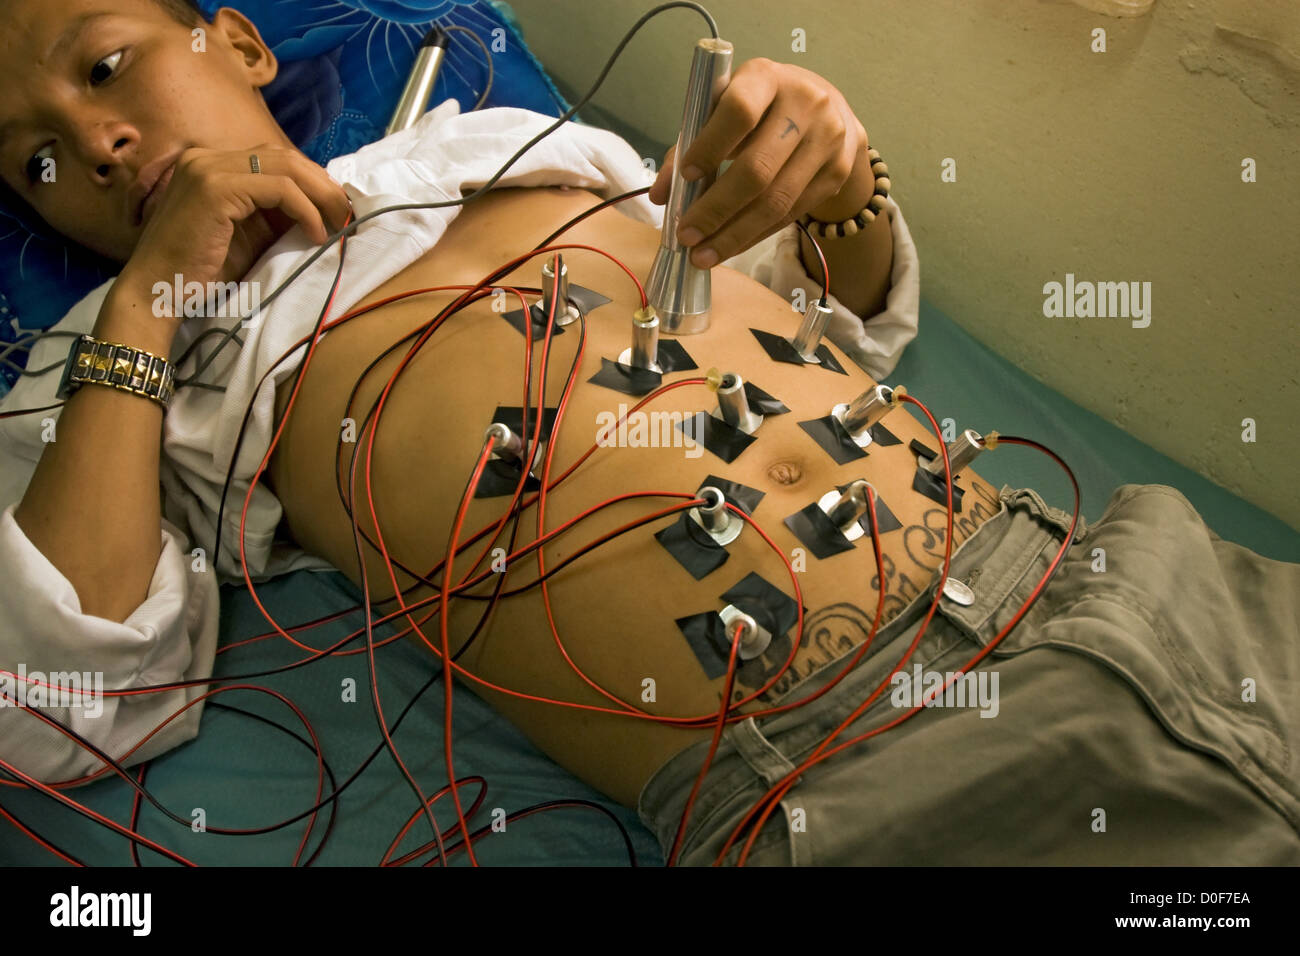 Laser Acupuncture Mai Khoi Clinic In Ho Chi Minh City Which Is Underwritten Catholic Church. Clinic Works Aids Patients Stock Photo - Alamy